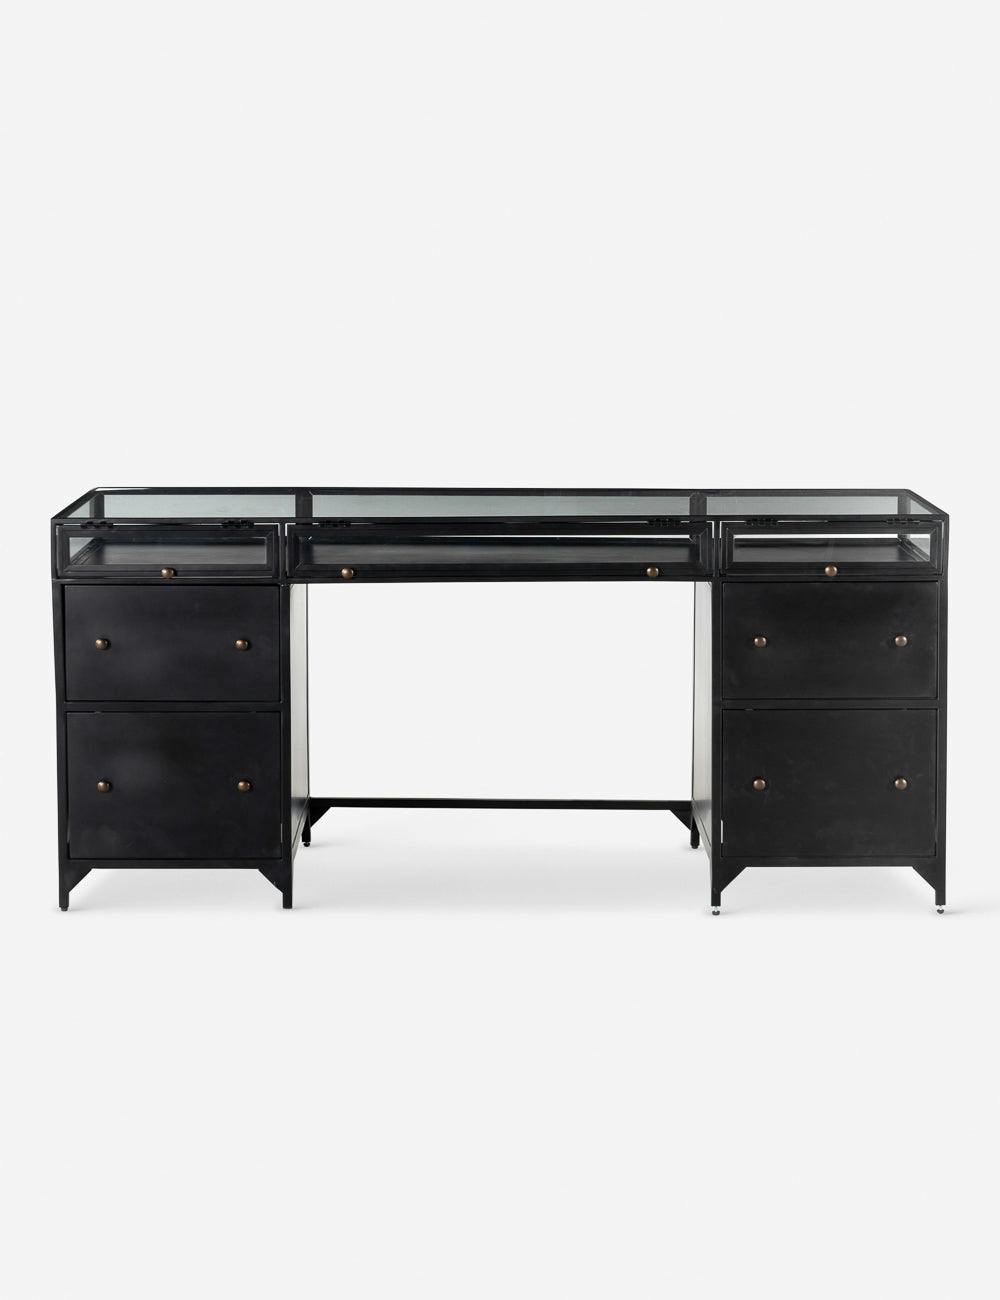 Sleek Black Executive Desk with Shadow Box Display and Filing Cabinet